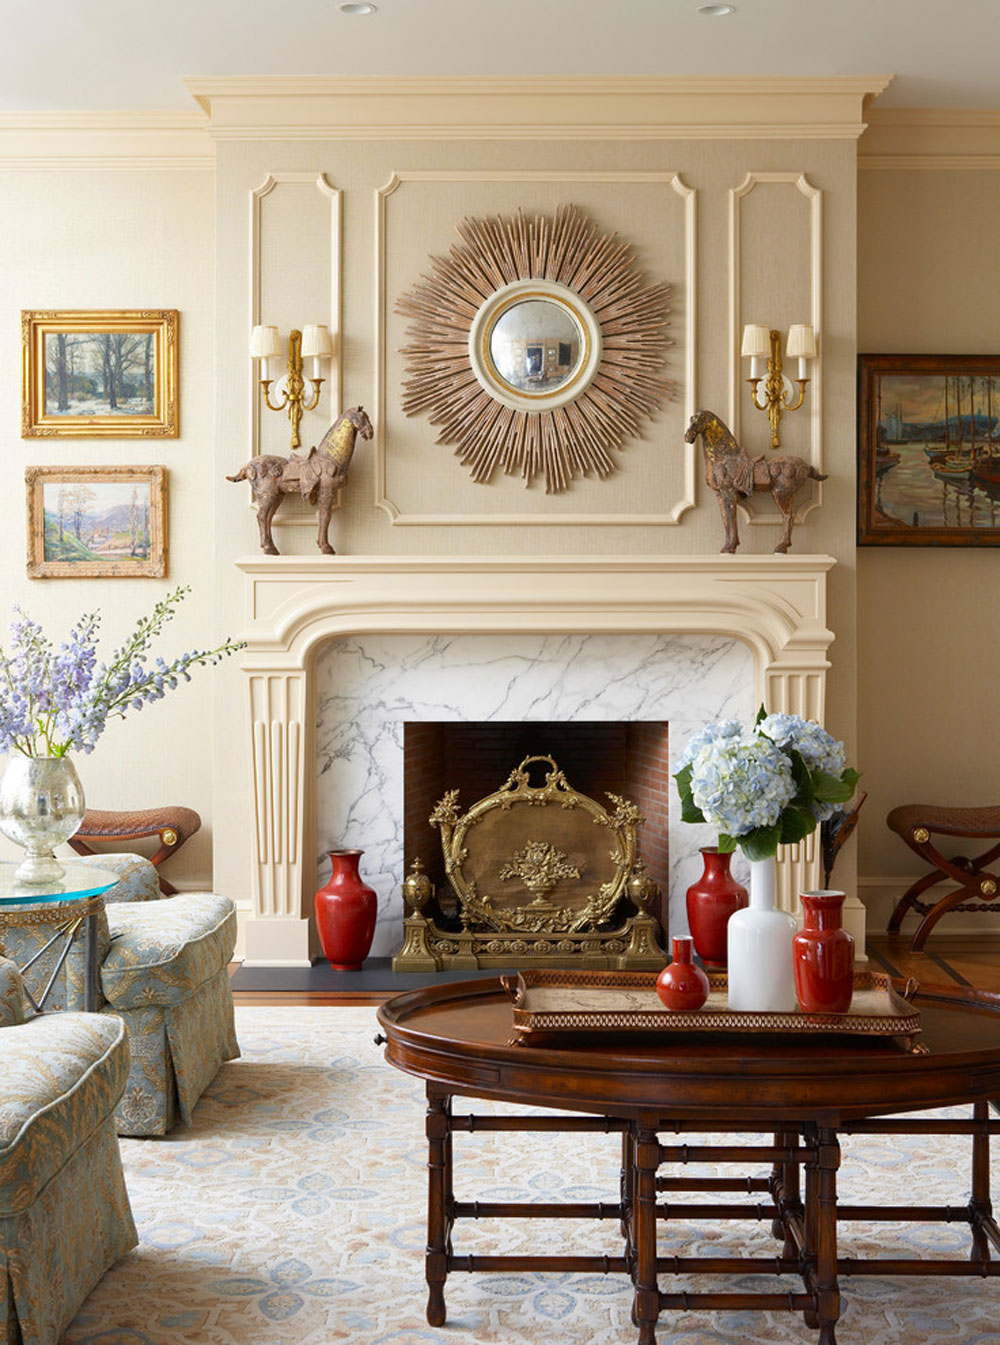 French-Country-Estate-by-Douglas-VanderHorn-Architects French country living room ideas to try in your lovely home